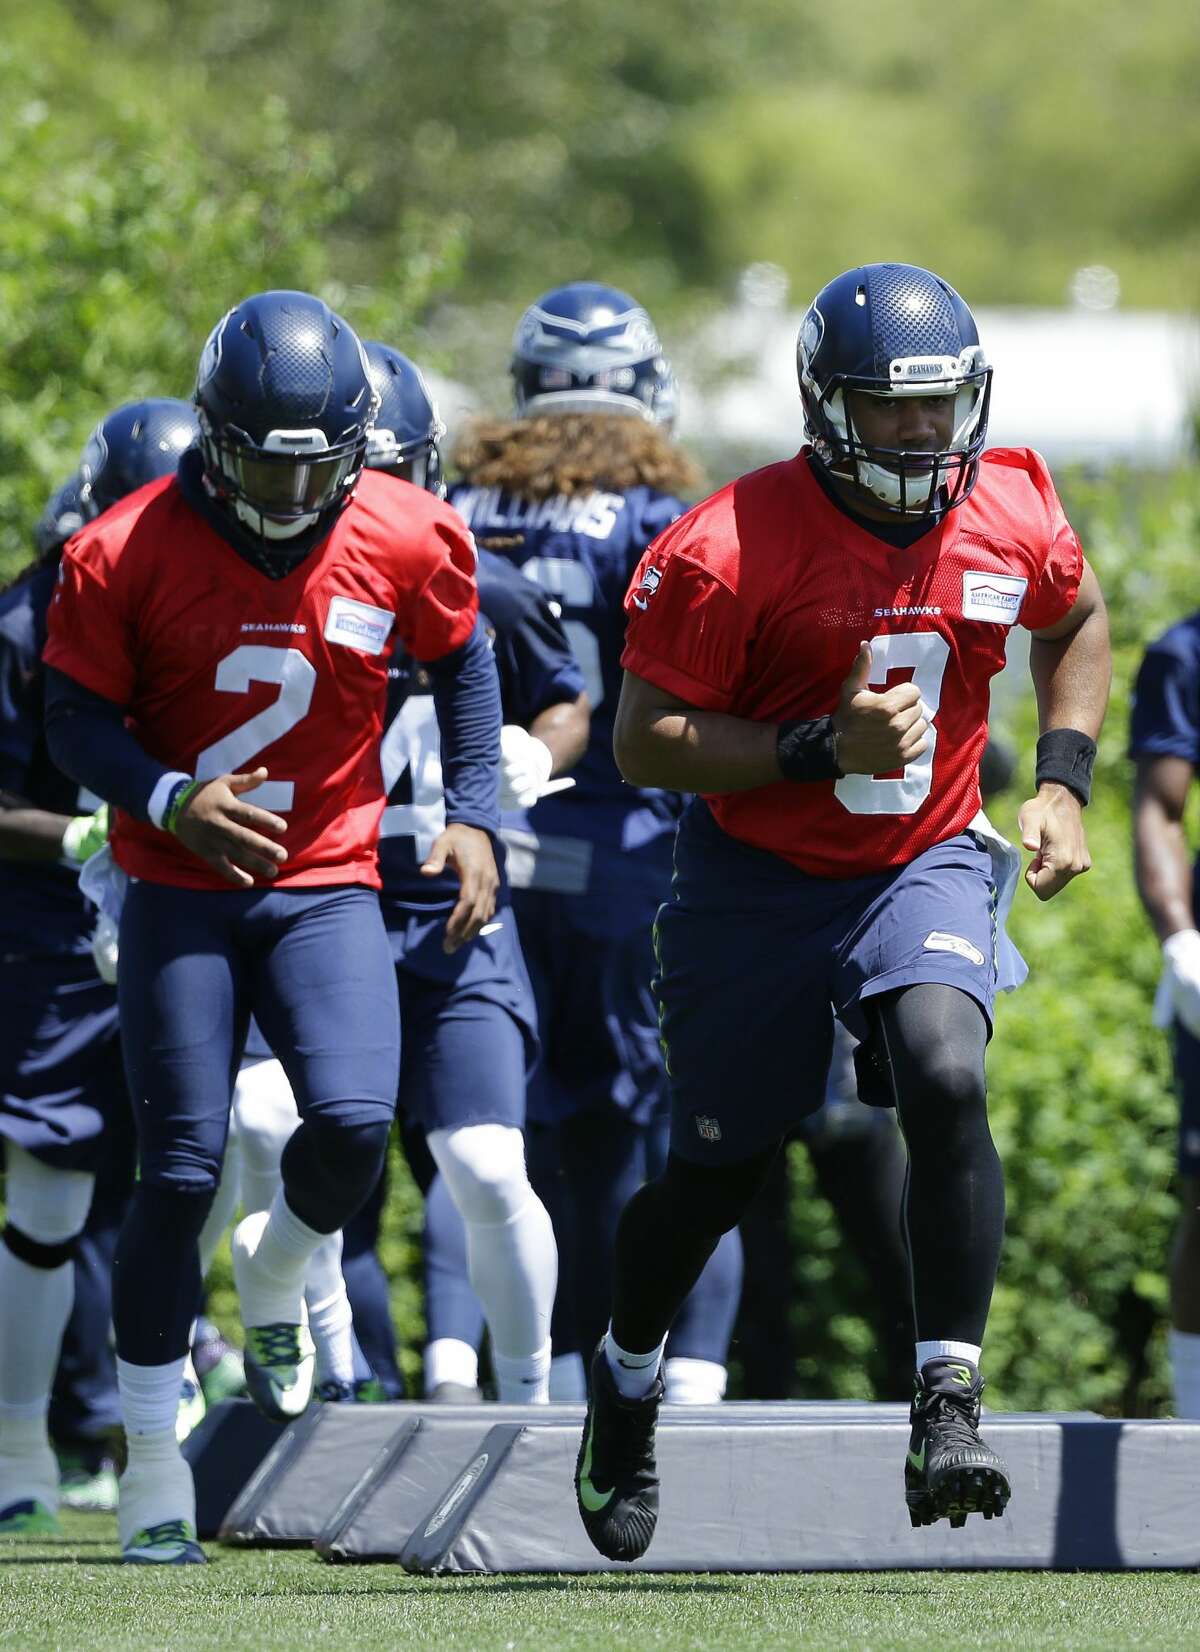 Seattle Seahawks quarterback Russell Wilson, right, and backup quarterback Trevone Boykin, left, take part in a drill during NFL football practice, Friday, June 2, 2017, in Renton, Wash. (AP Photo/Ted S. Warren)